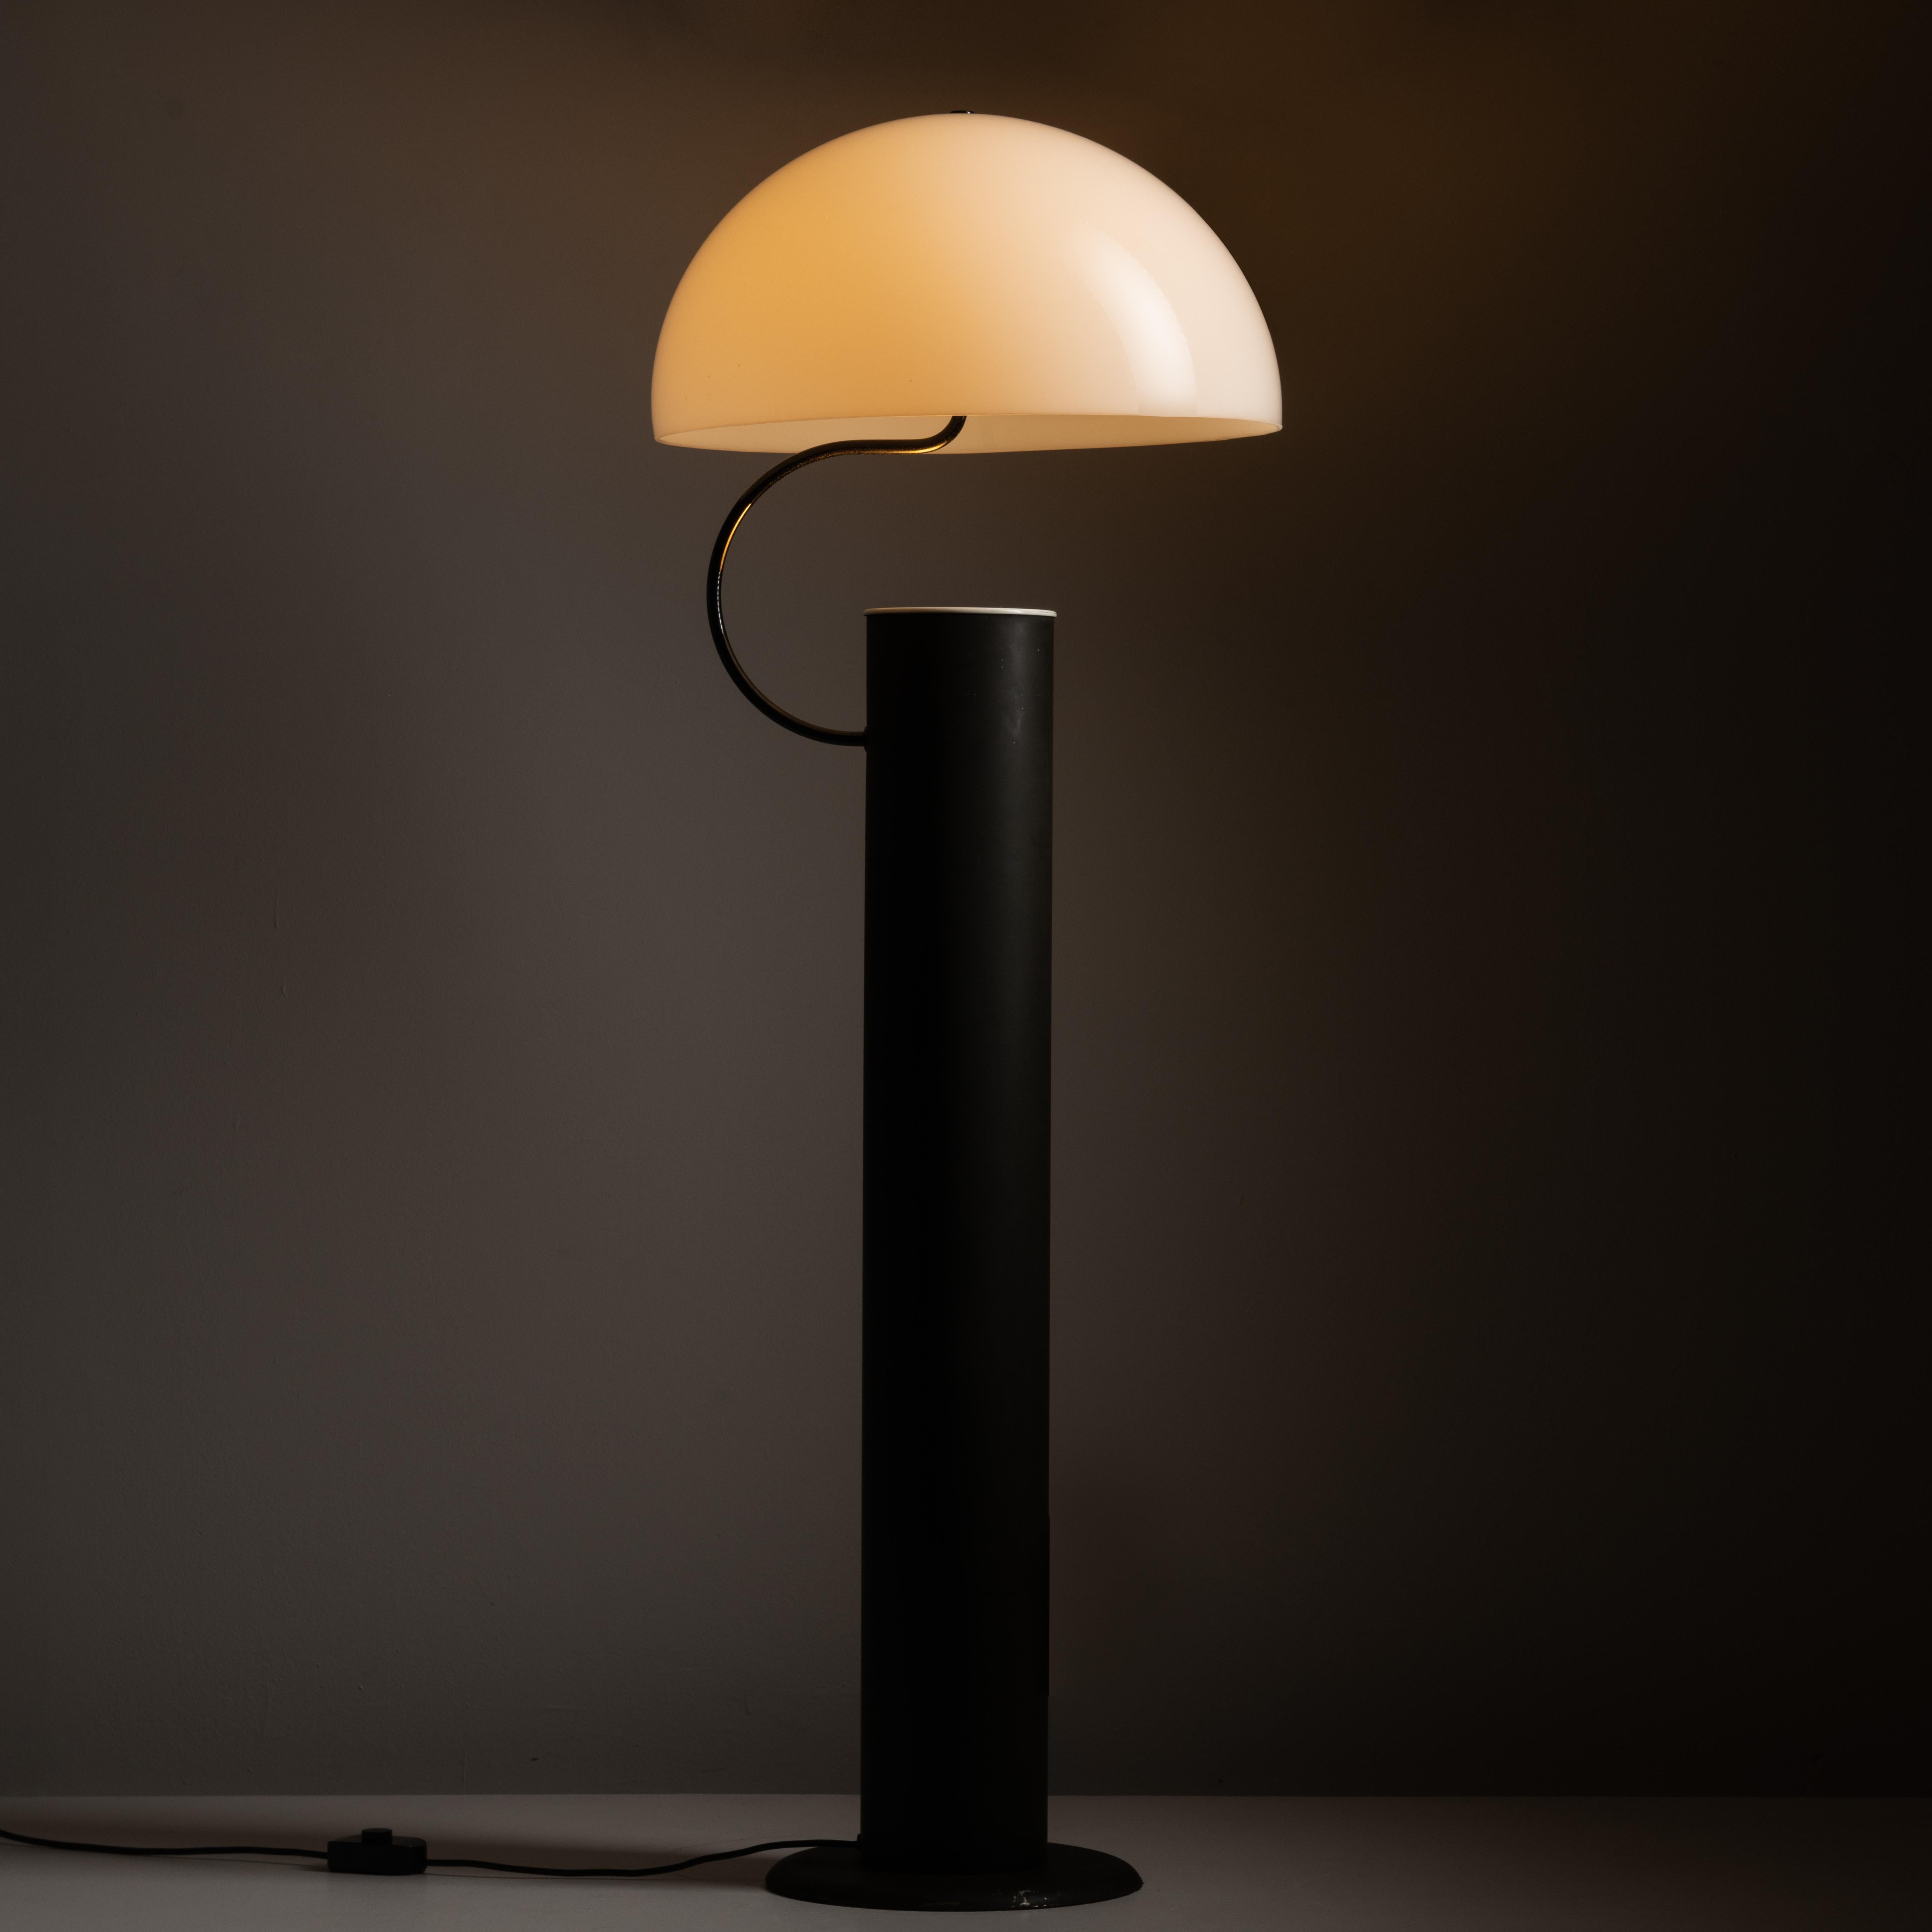 Alida floor lamp by Vico Magistretti for Oluce. Designed and manufactured in Italy, circa the 1970s. This rare model consists of an acrylic dome shade which has an illusion of floating just above a black enameled post. The shade is hoisted by a